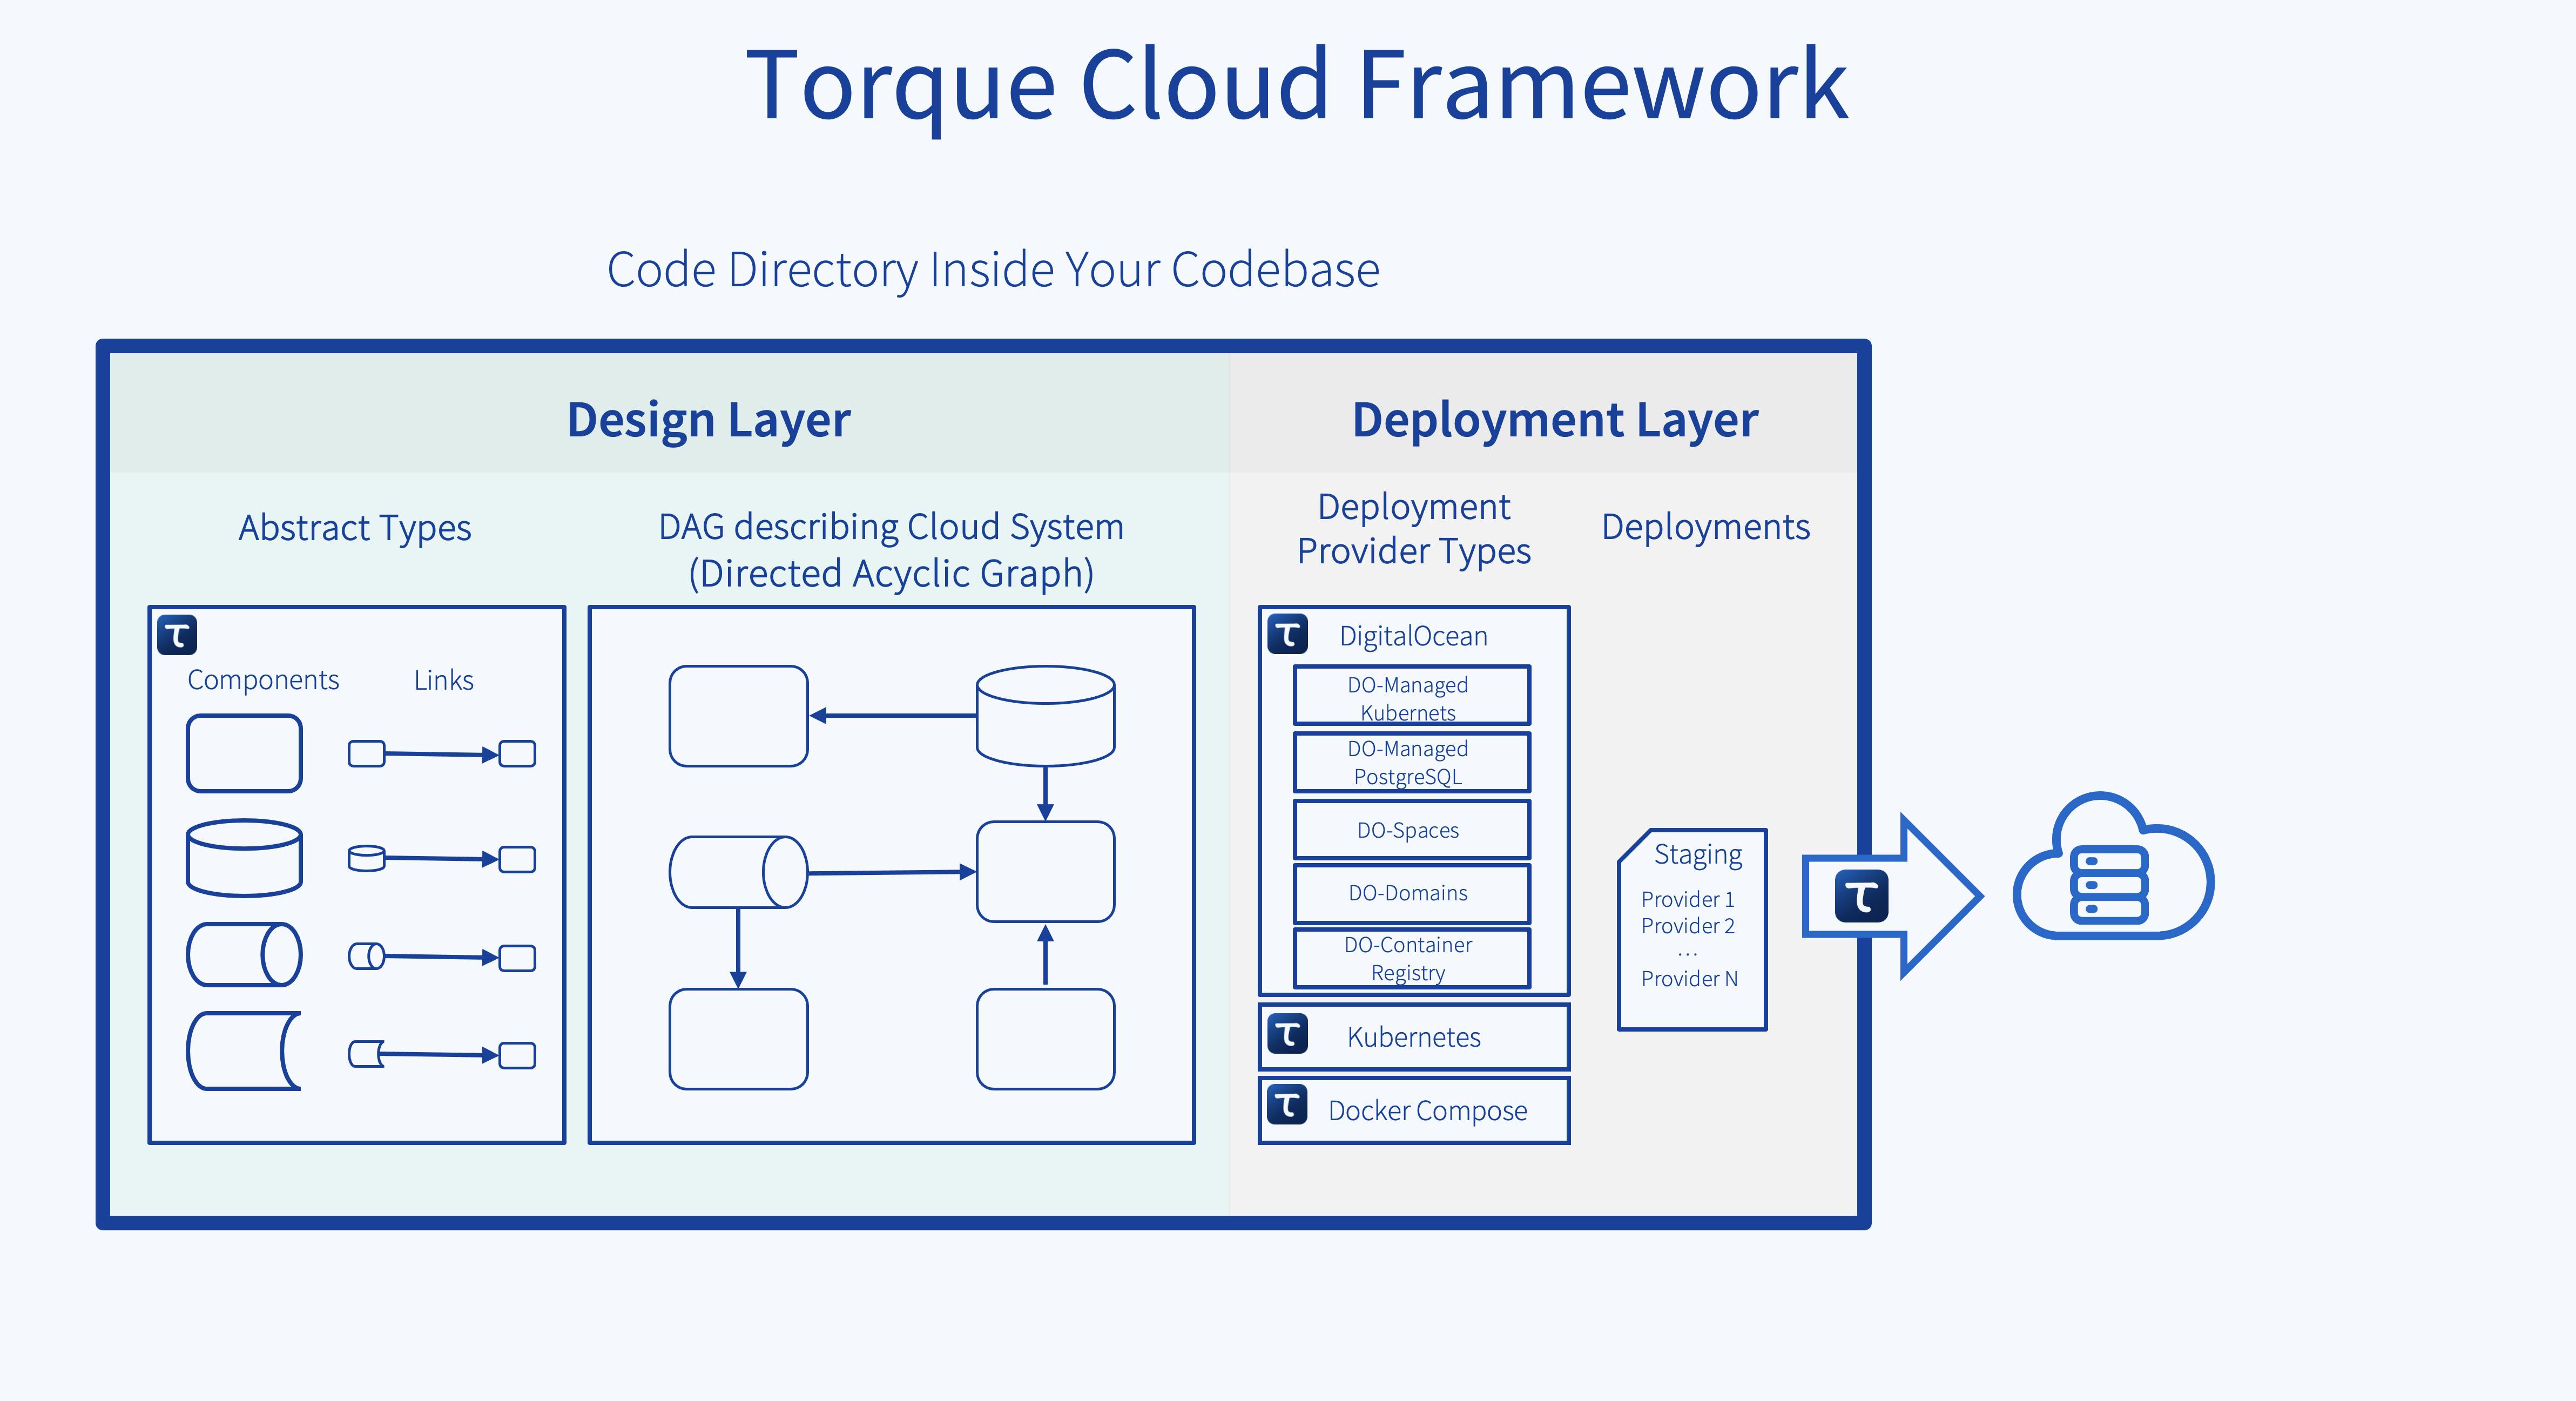 Figure. The top-level structure of Torque's code directory.